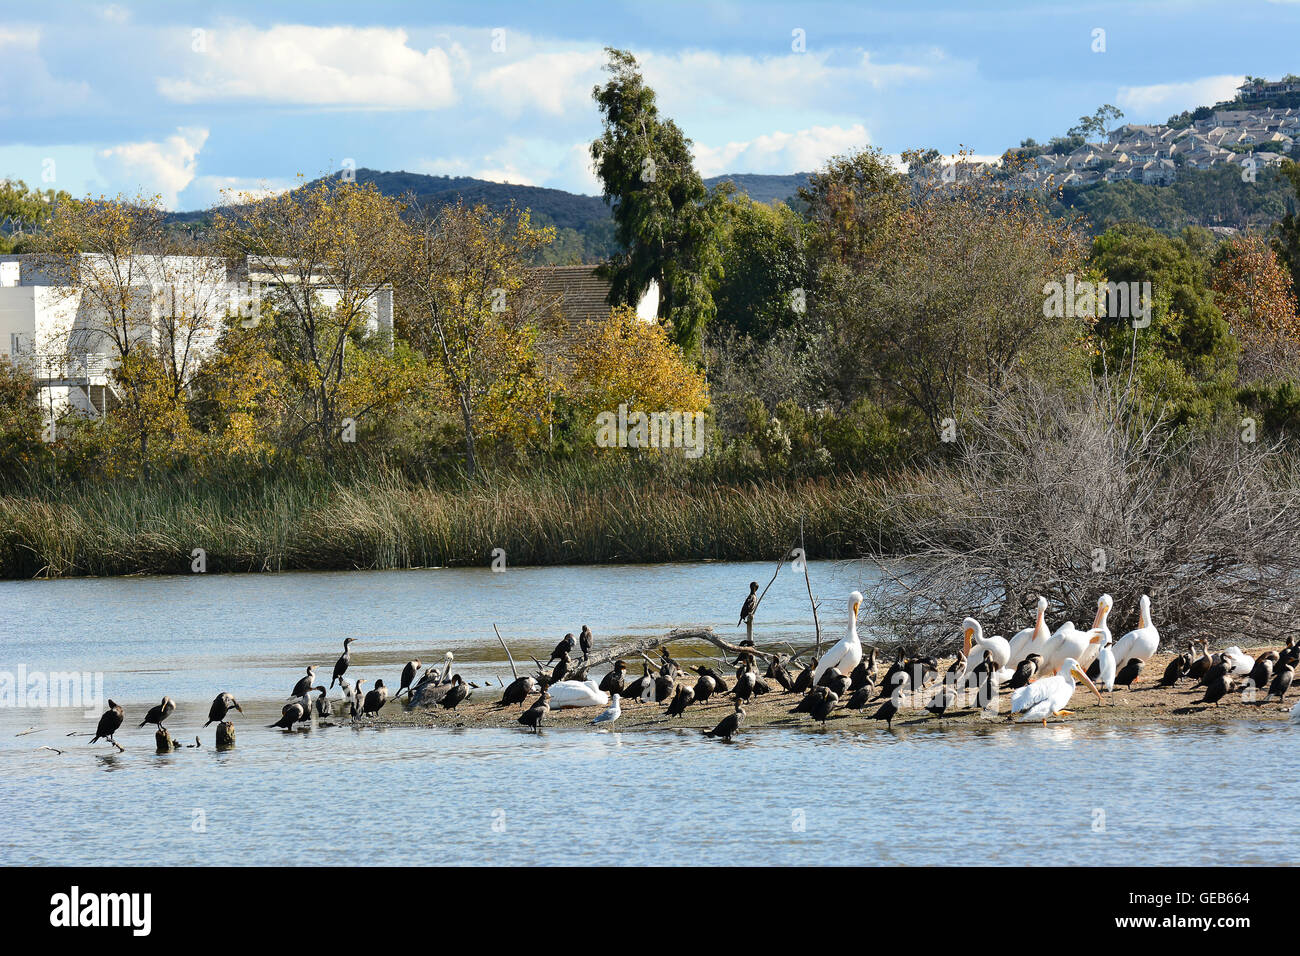 Waterfowl on island in pond at the San Joaquin Nature Preserve, Irvine, California. Stock Photo